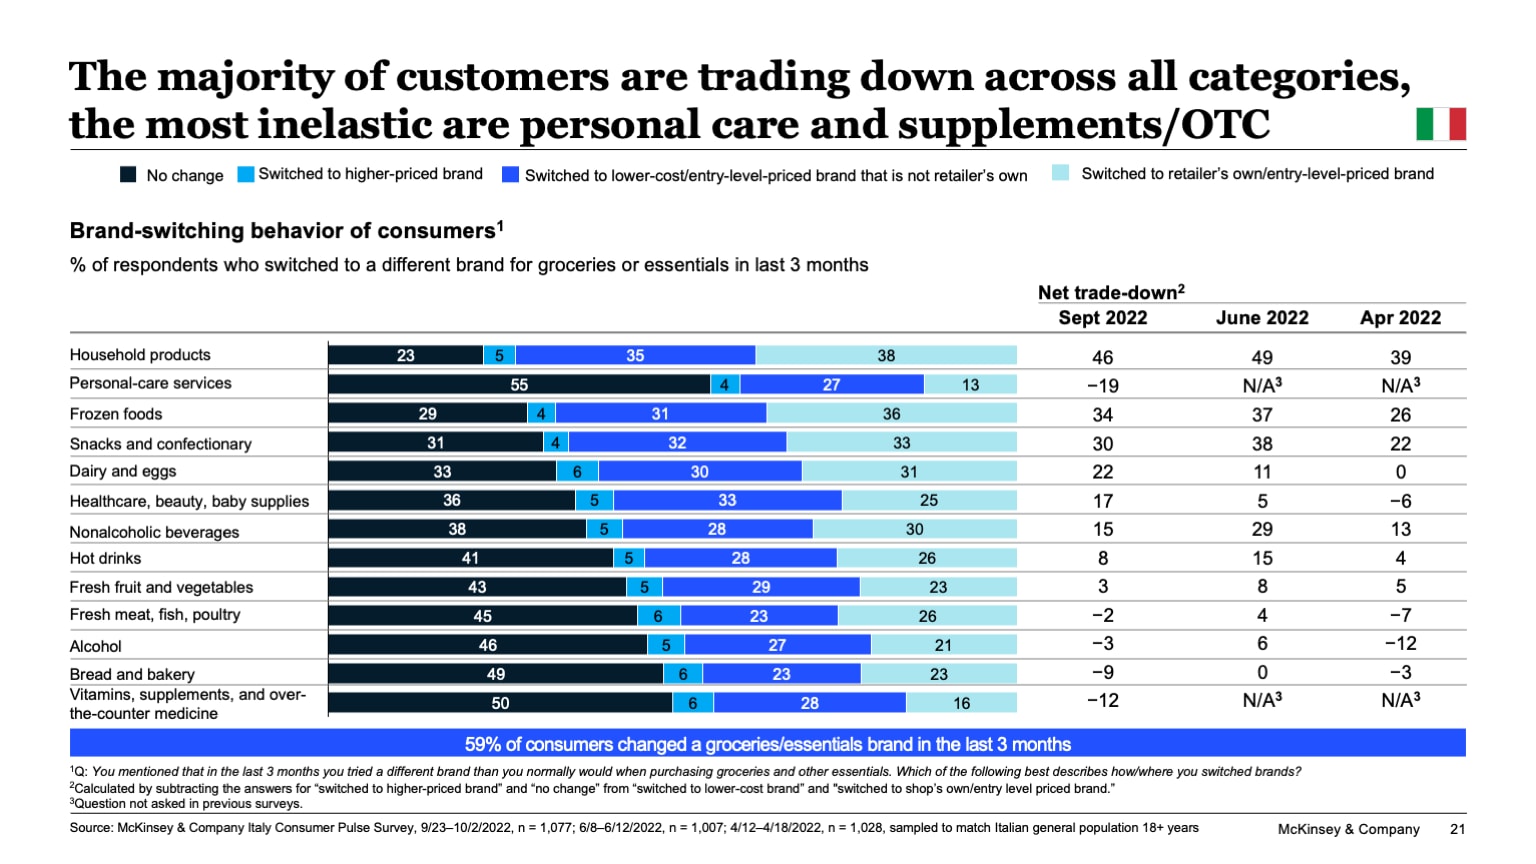 The majority of customers are trading down across all categories, the most inelastic are personal care and supplements/OTC